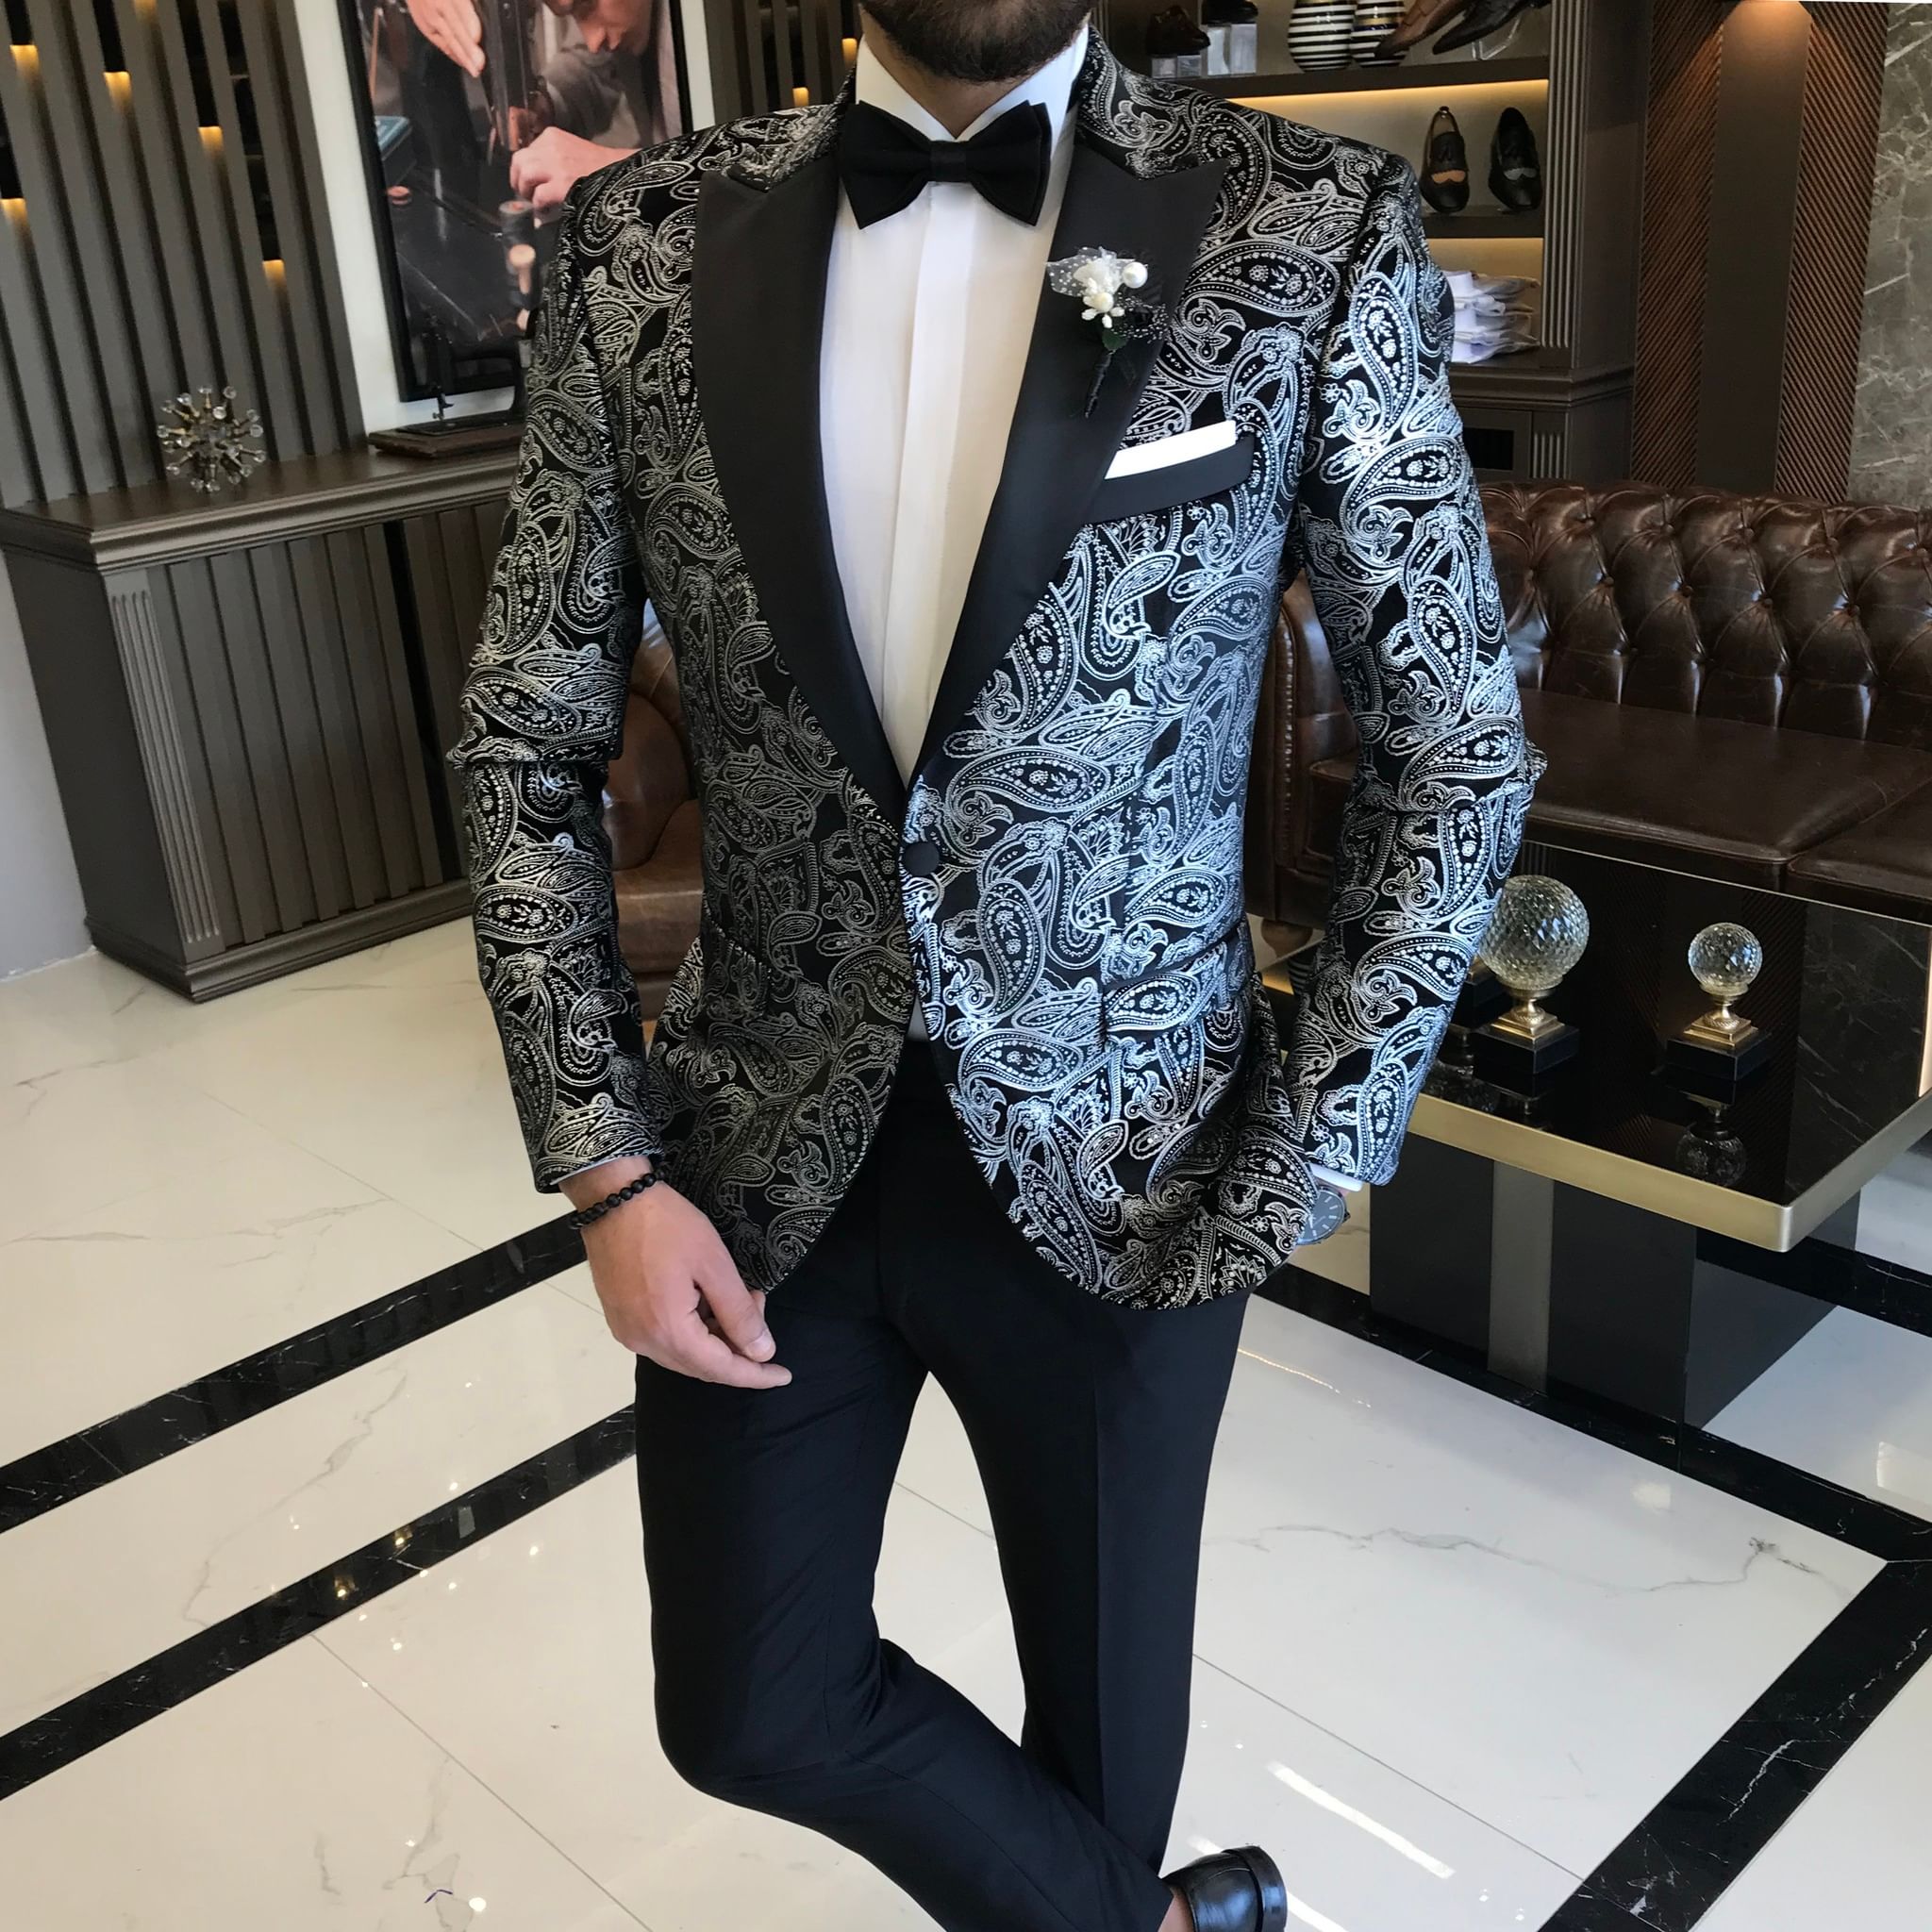 Floral Jacquard Suits For Men Wedding Tuxedos Fashion Groom Wear Formal Business Classic Jacket Pants Anpassa